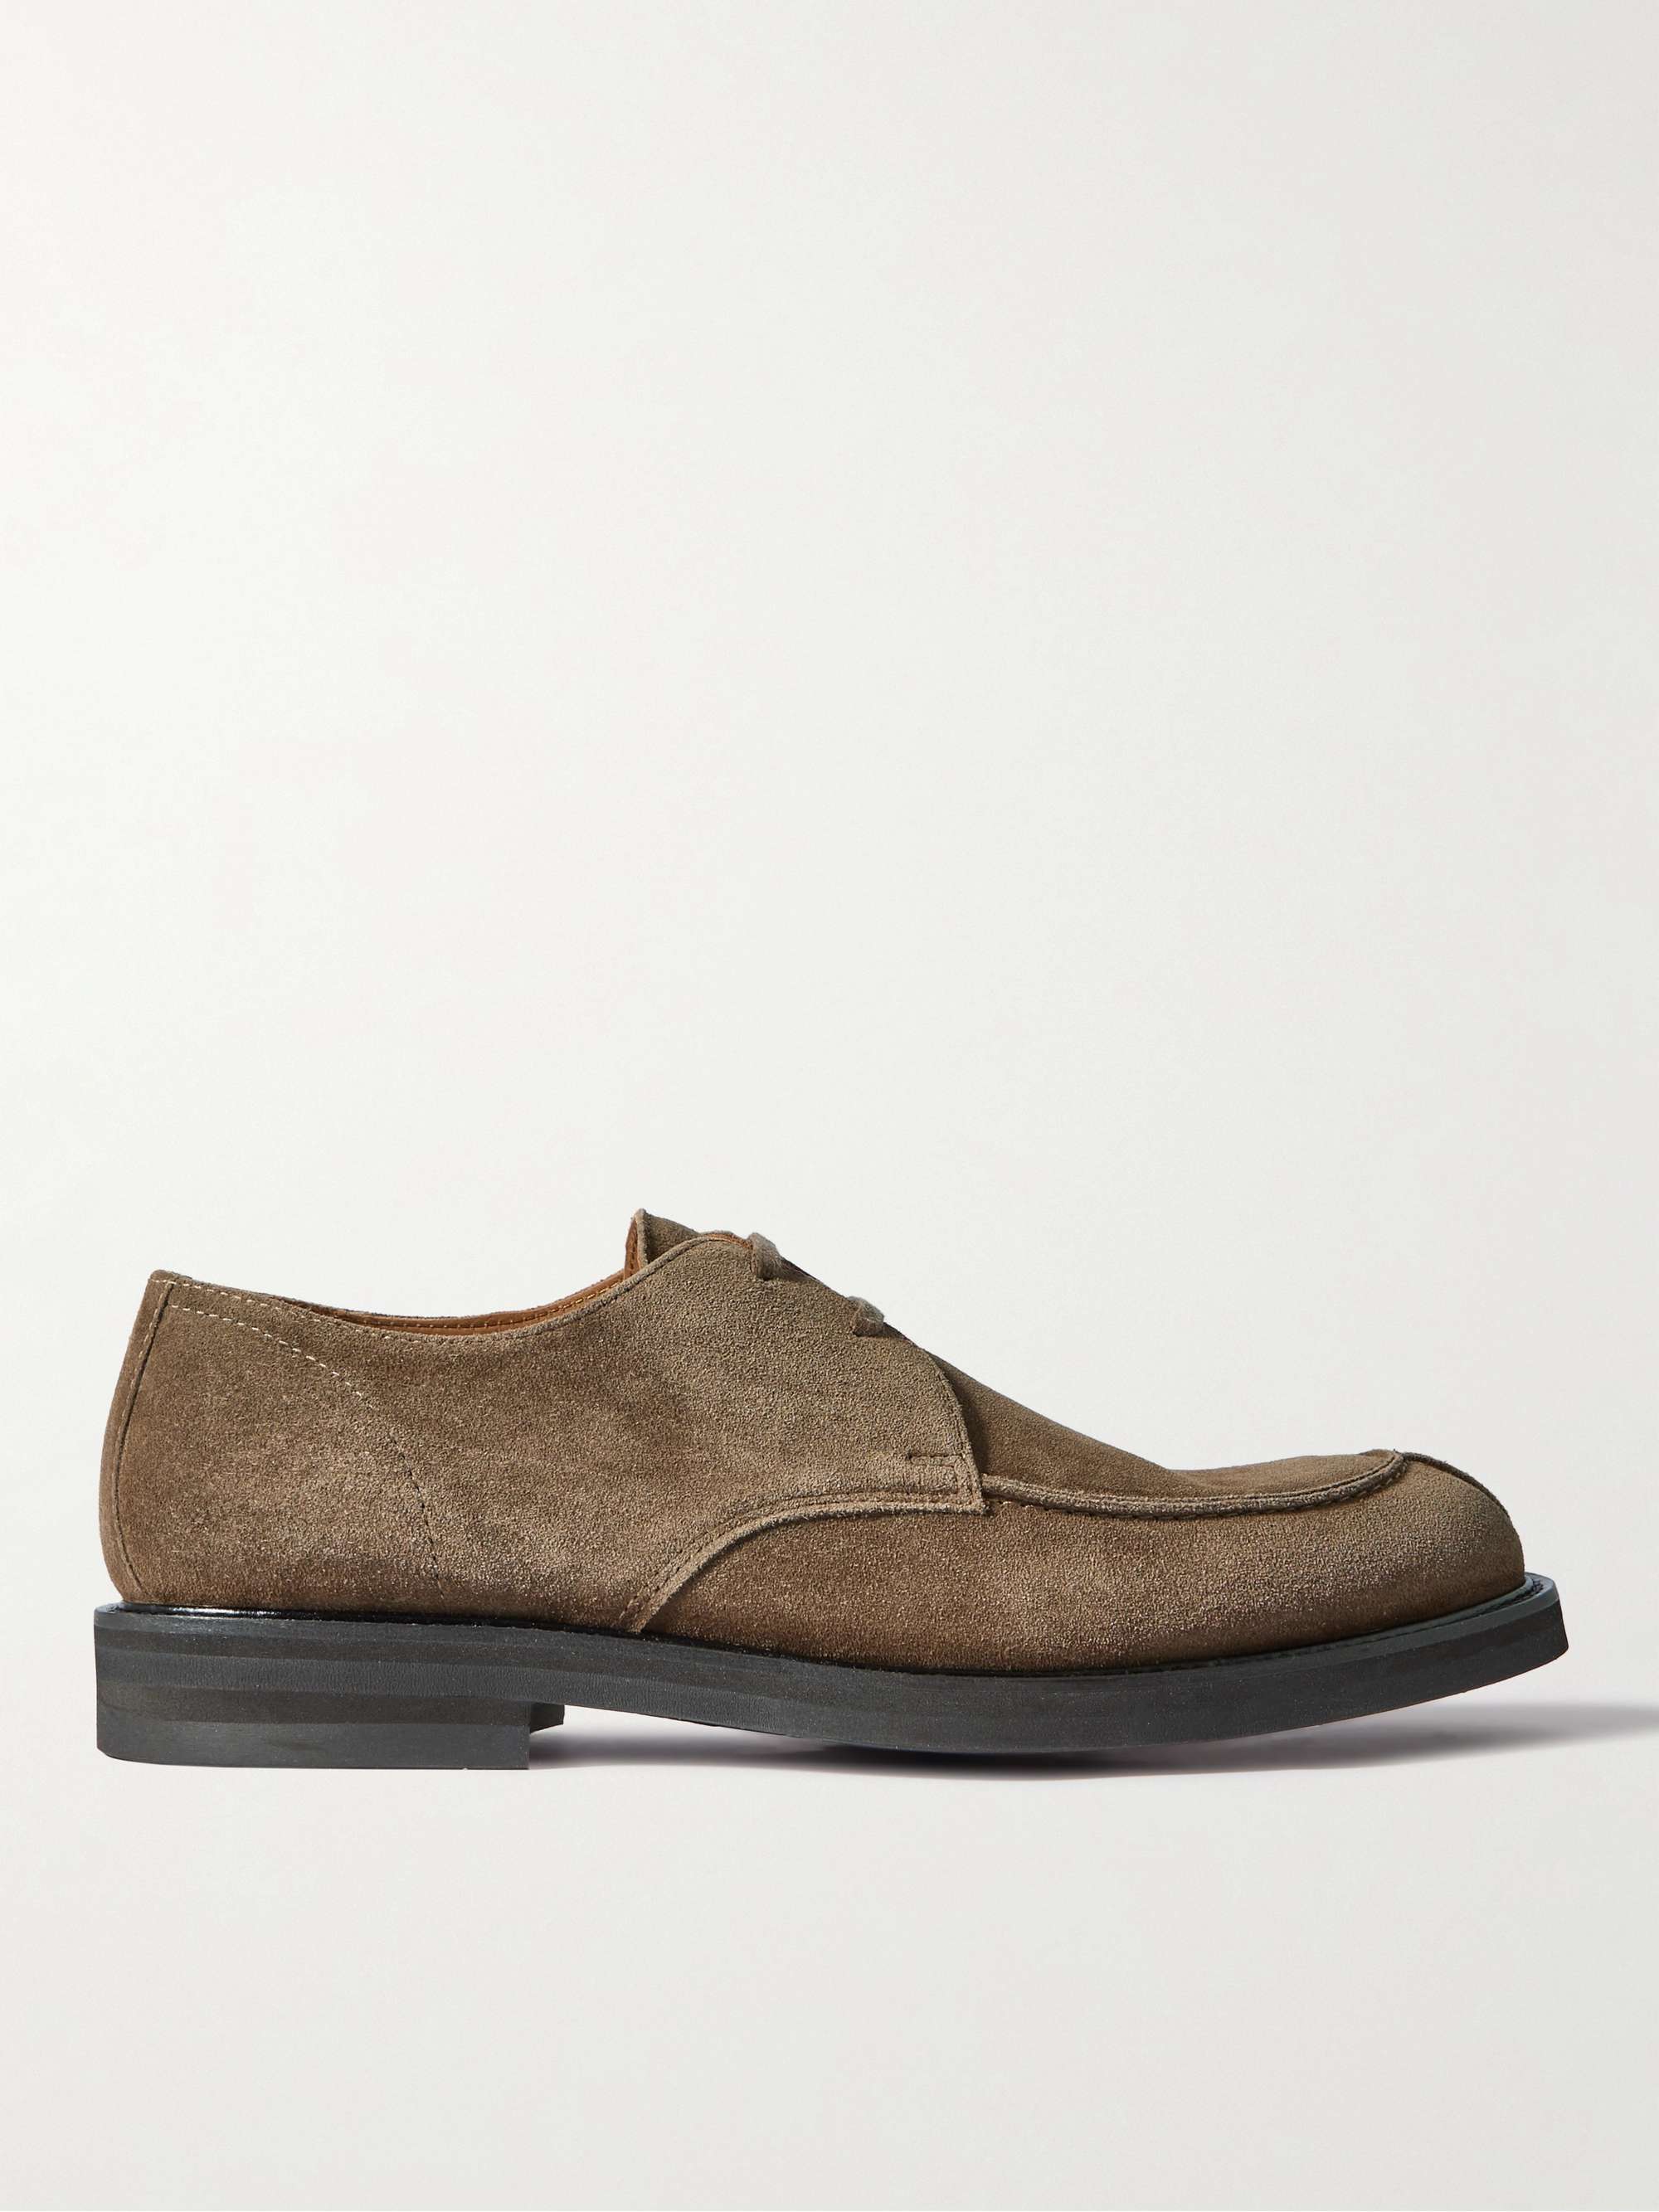 MR P. Andrew Split-Toe Regenerated Suede by evolo® Derby Shoes